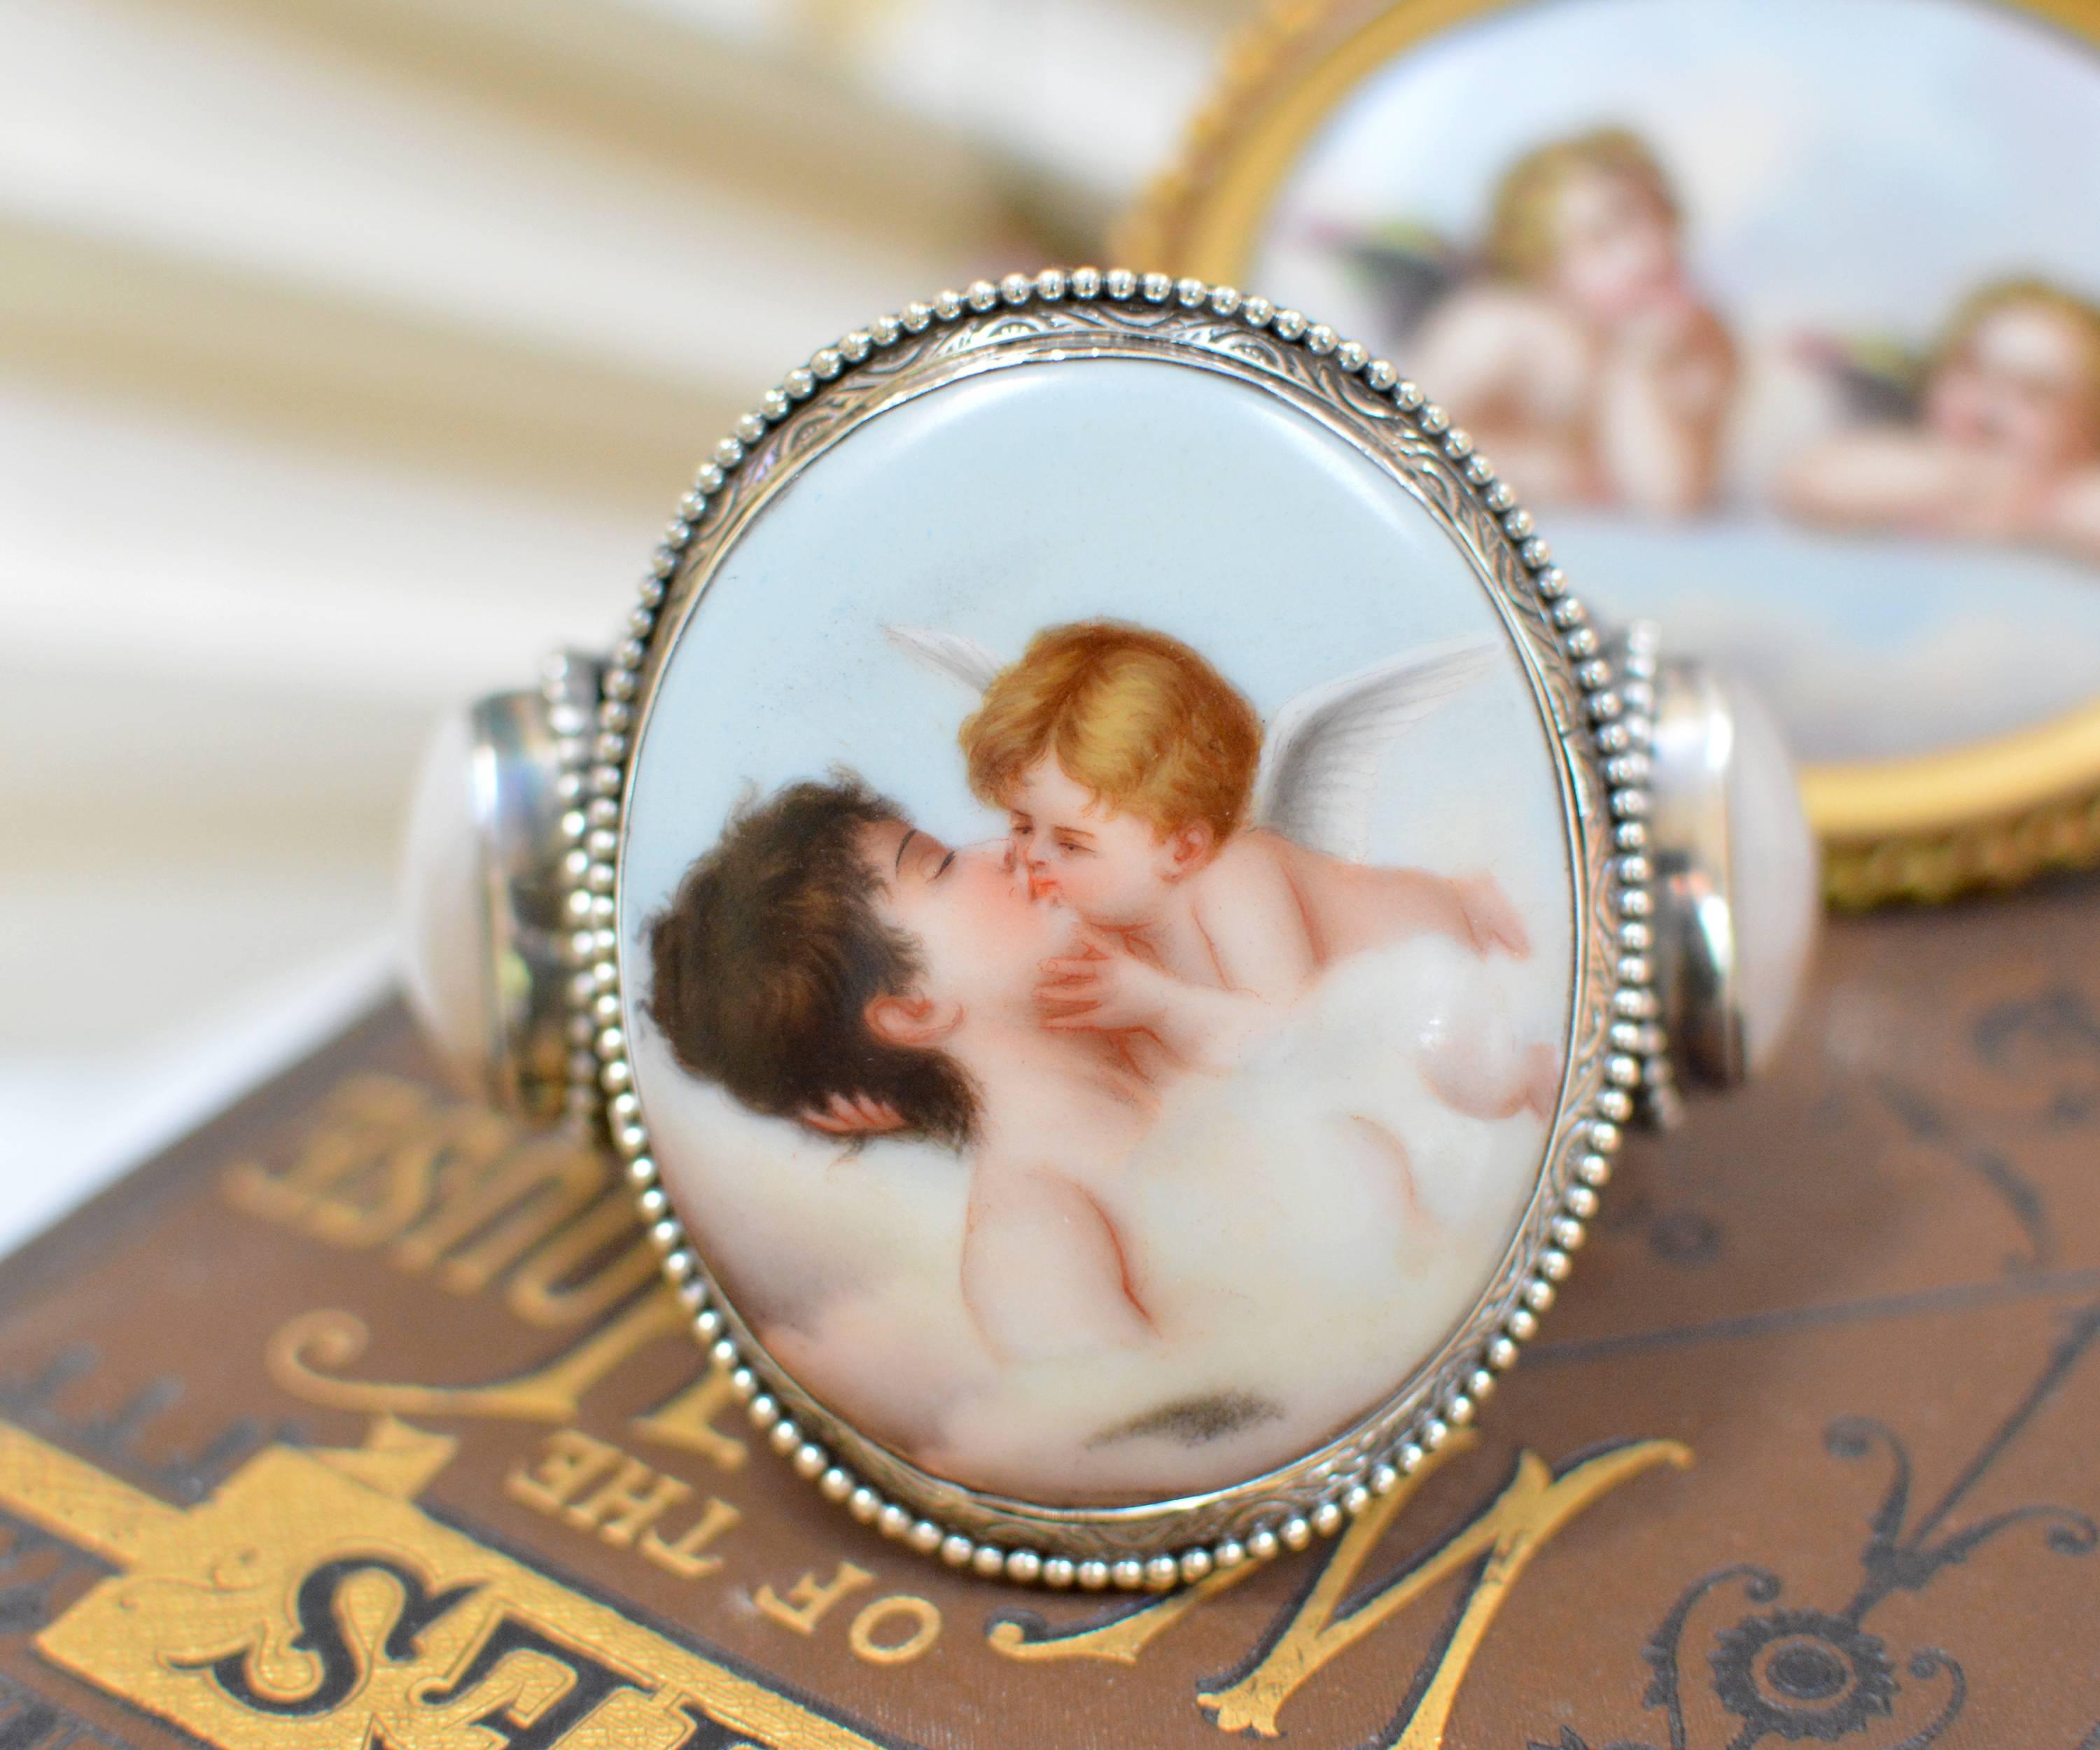 This exquisite Sterling Silver cuff bracelet features a  French porcelain portrait depicting Cupids Kiss. This exceptional image, painted after Antonio Canova's beloved sculpture - originally commissioned in 1787 resides proudly in a central court